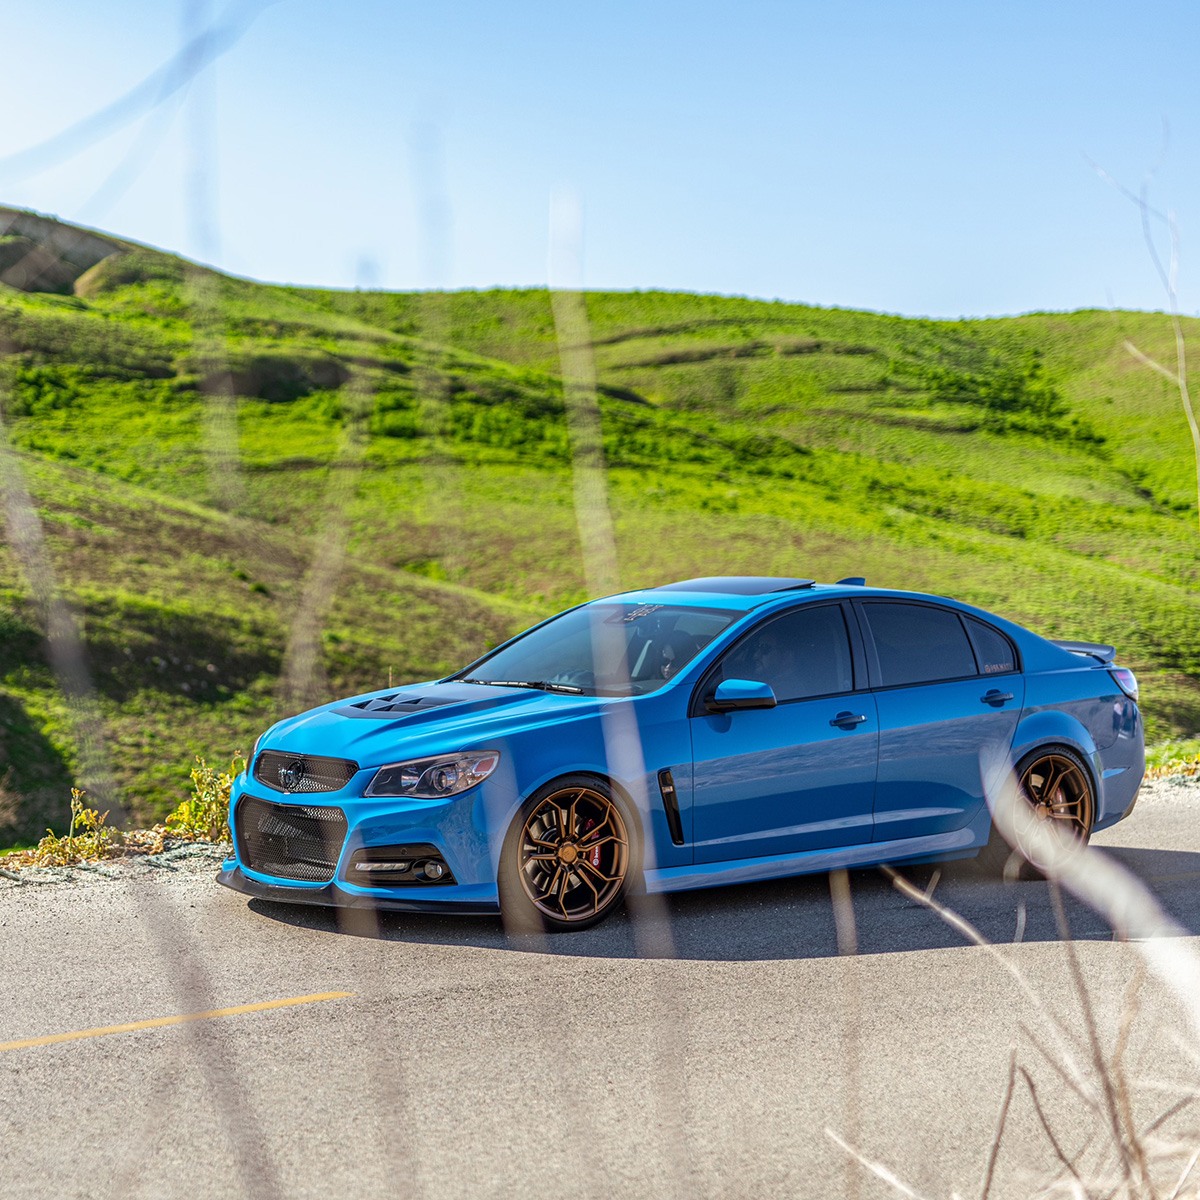 Lowered Chevy SS on Kings SSSl springs and 20” Avant- Garde M632 rims